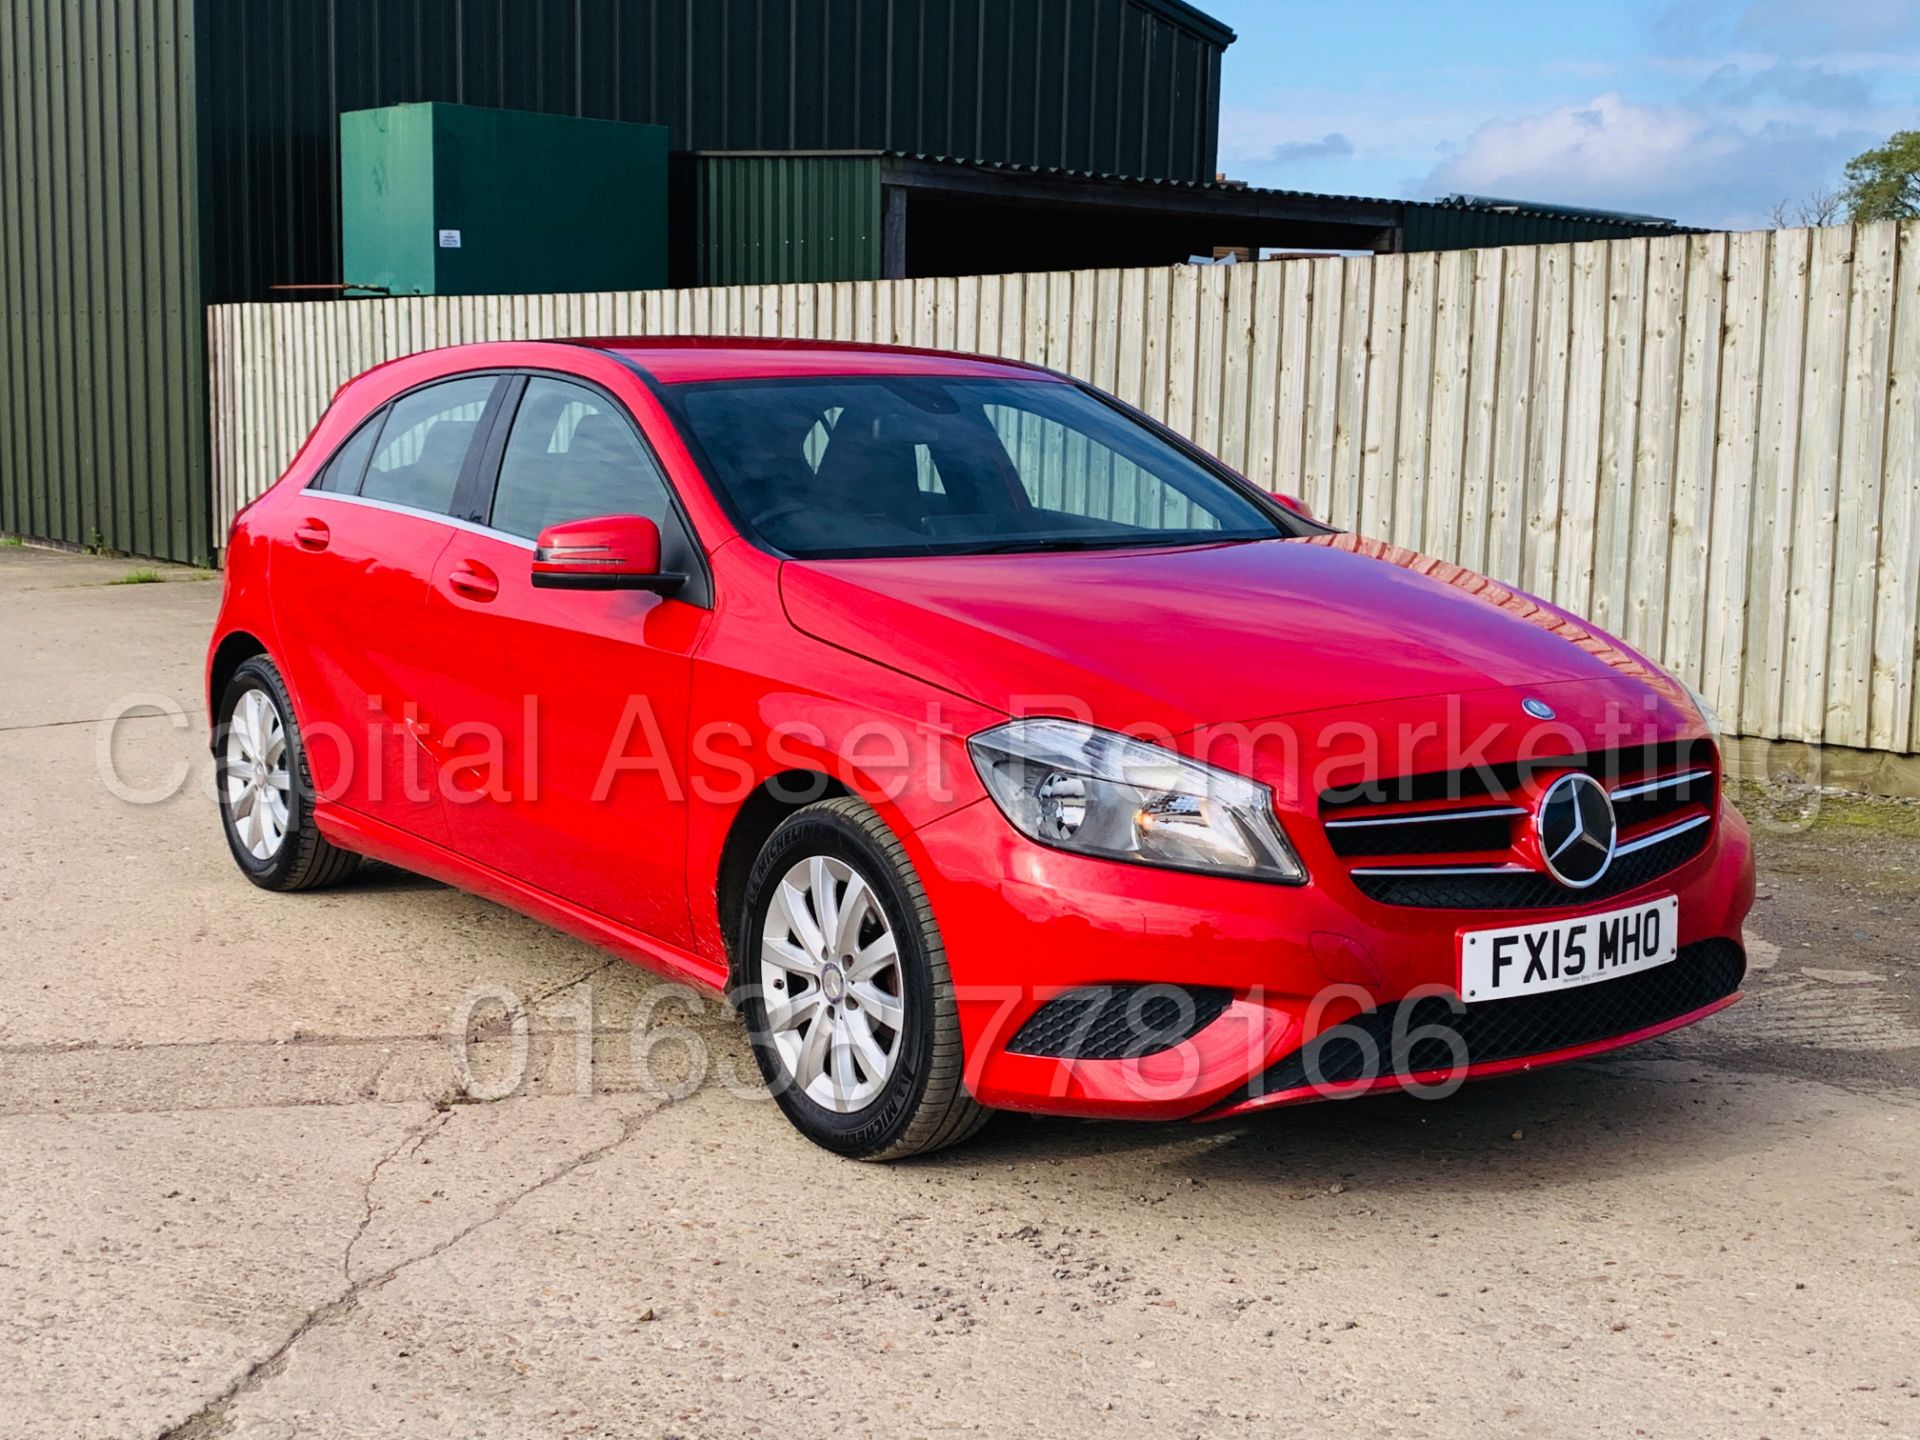 (ON SALE) MERCEDES-BENZ A180 *5 DOOR HATCHBACK* (2015 - NEW MODEL) '1.5 CDI - 7-G TRONIC AUTO' - Image 3 of 43